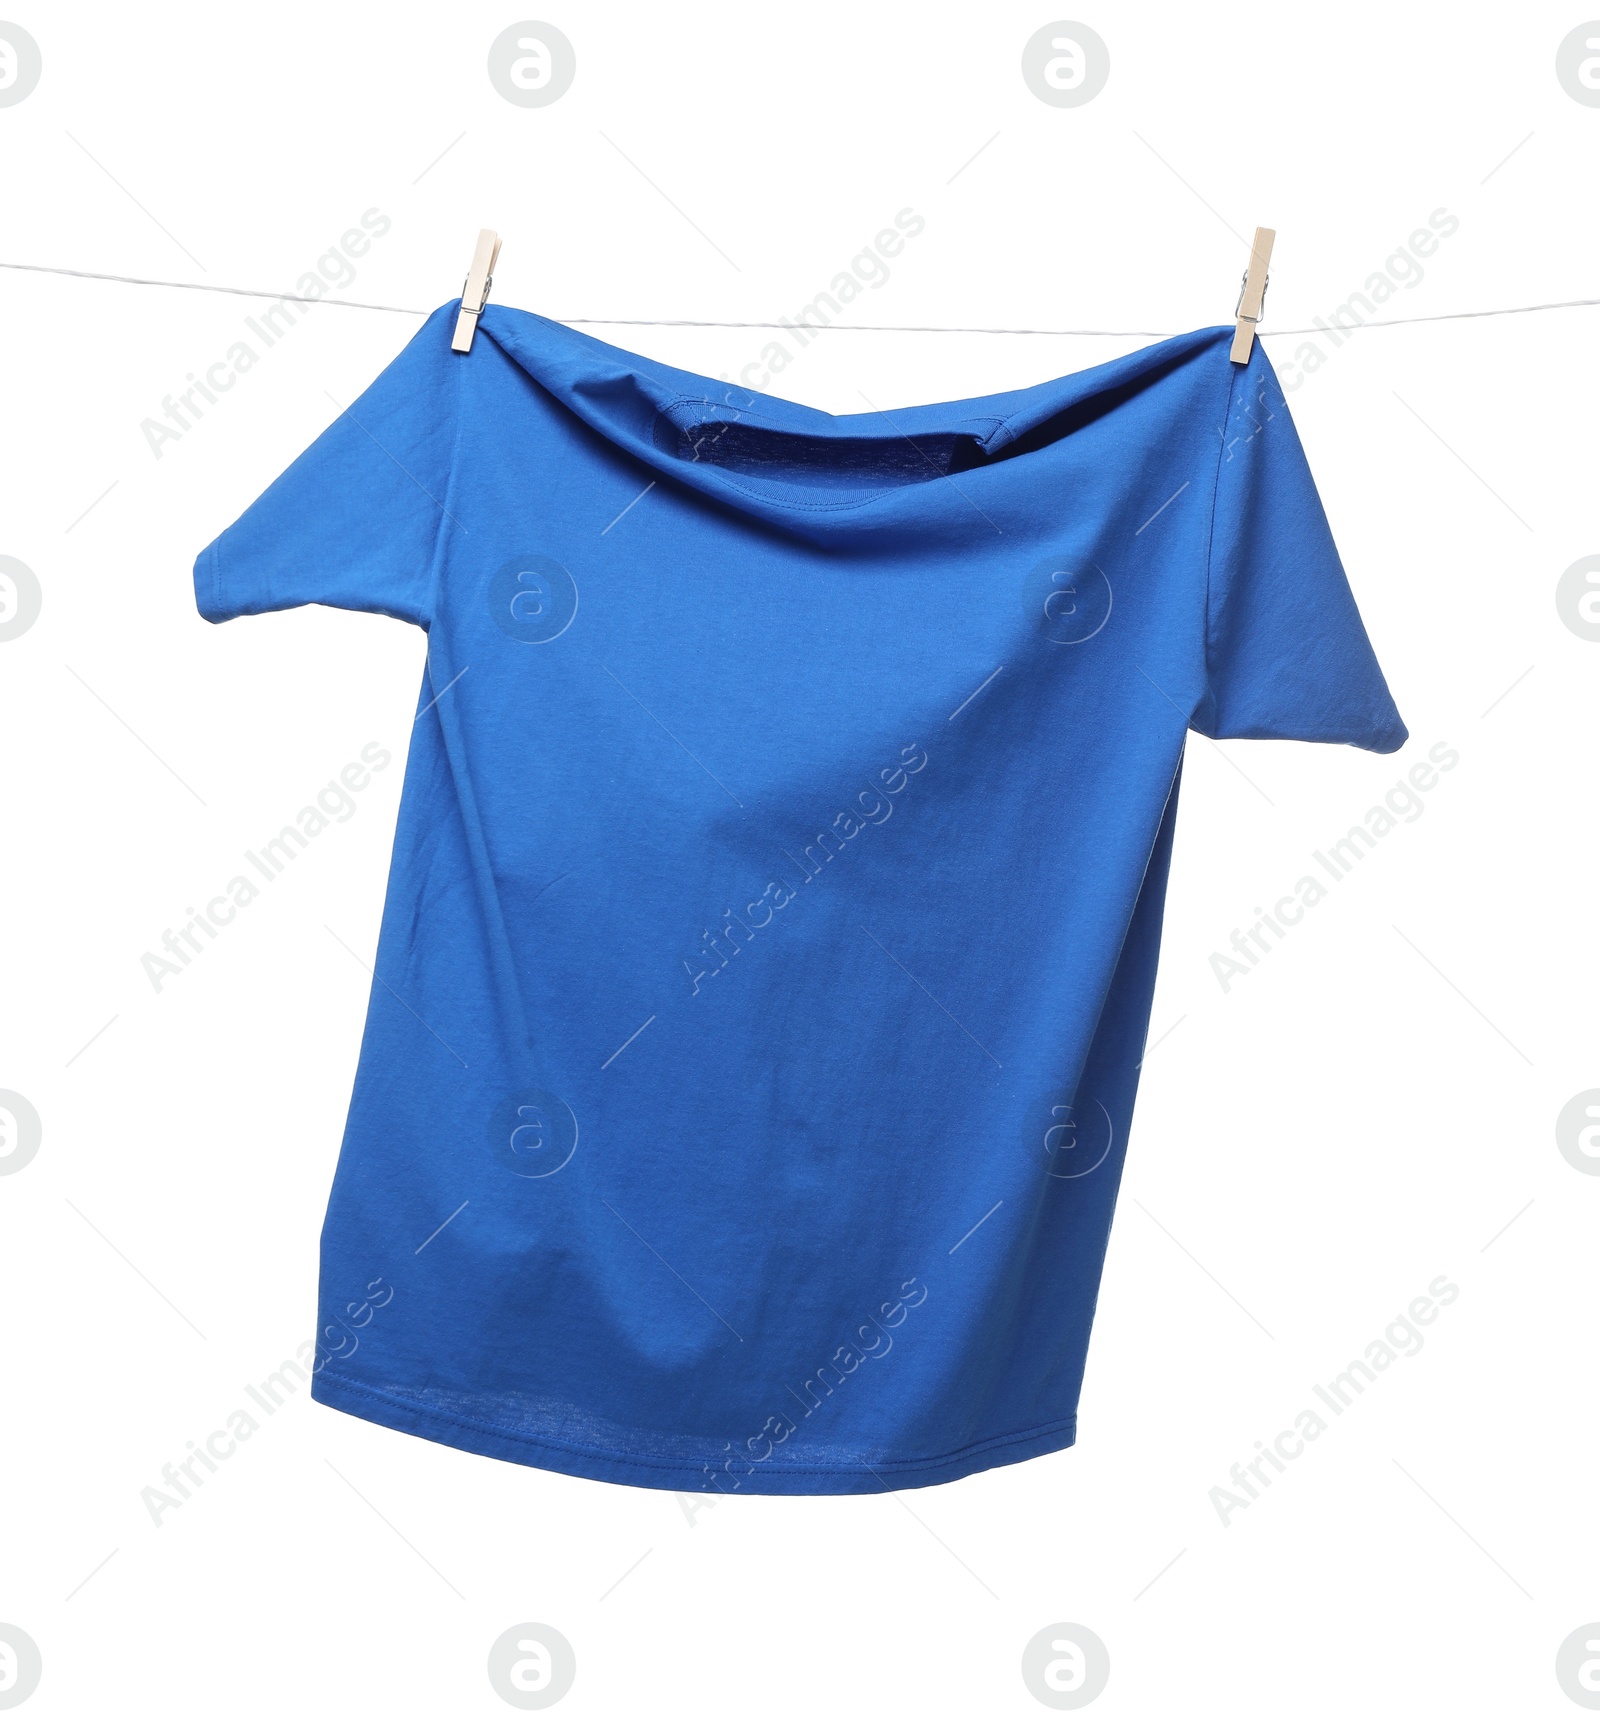 Photo of One blue t-shirt drying on washing line isolated on white